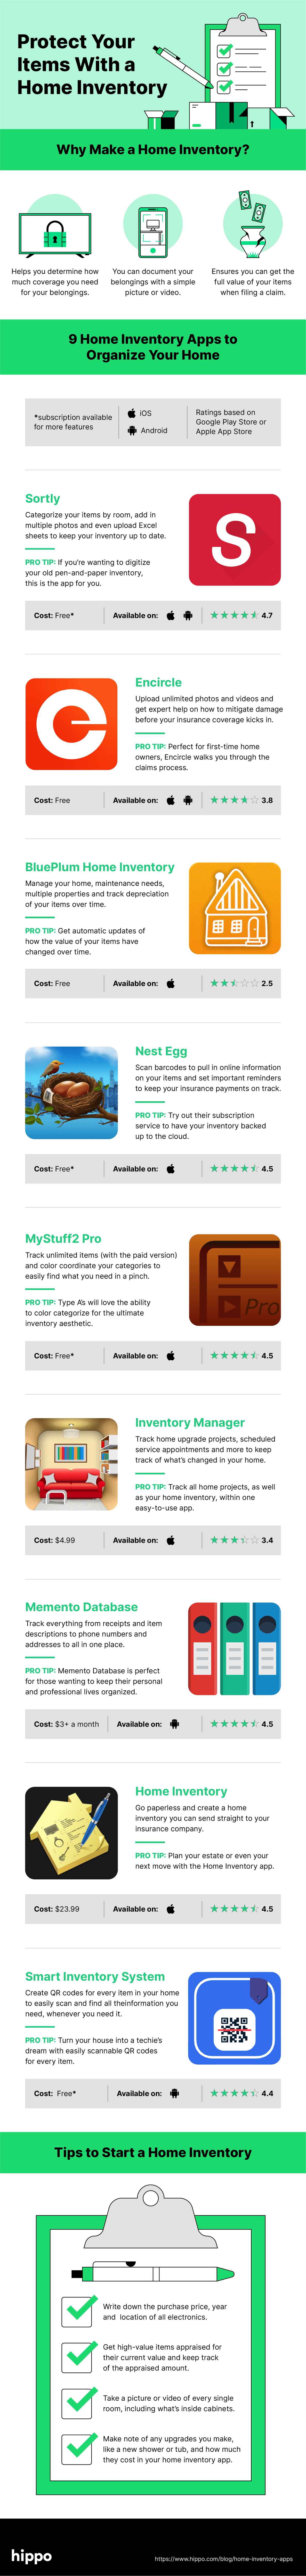 Infographic with images and illustrations of how to do a home inventory and the best apps for it